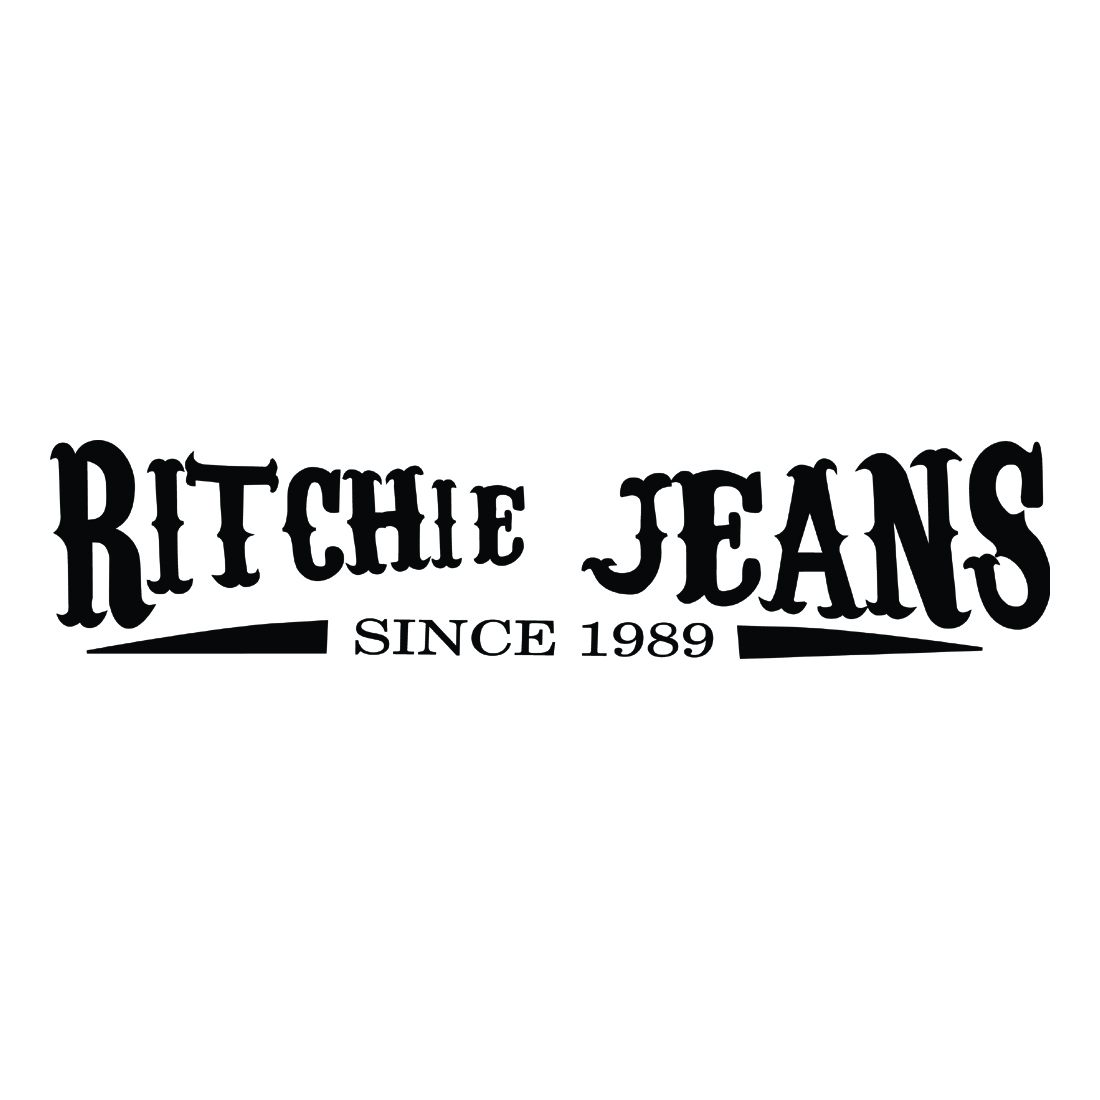 Ritchie Jeans T Shirt cover image.